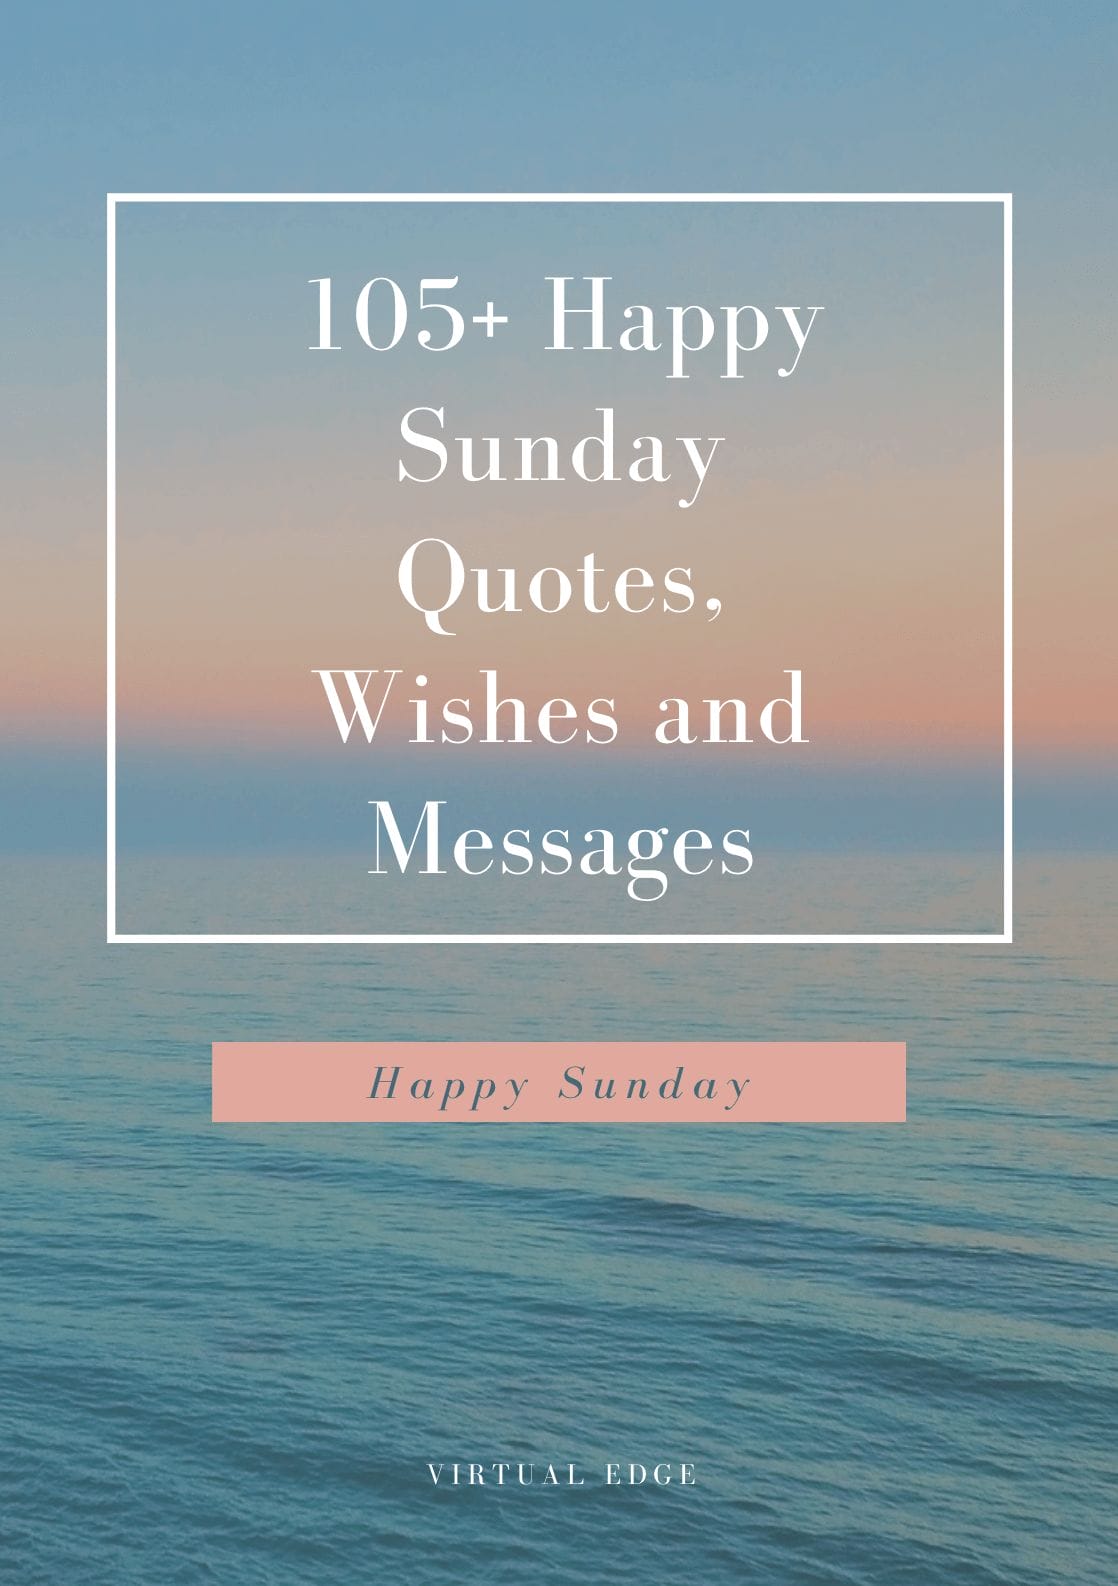 105+ Happy Sunday Quotes, Wishes and Messages